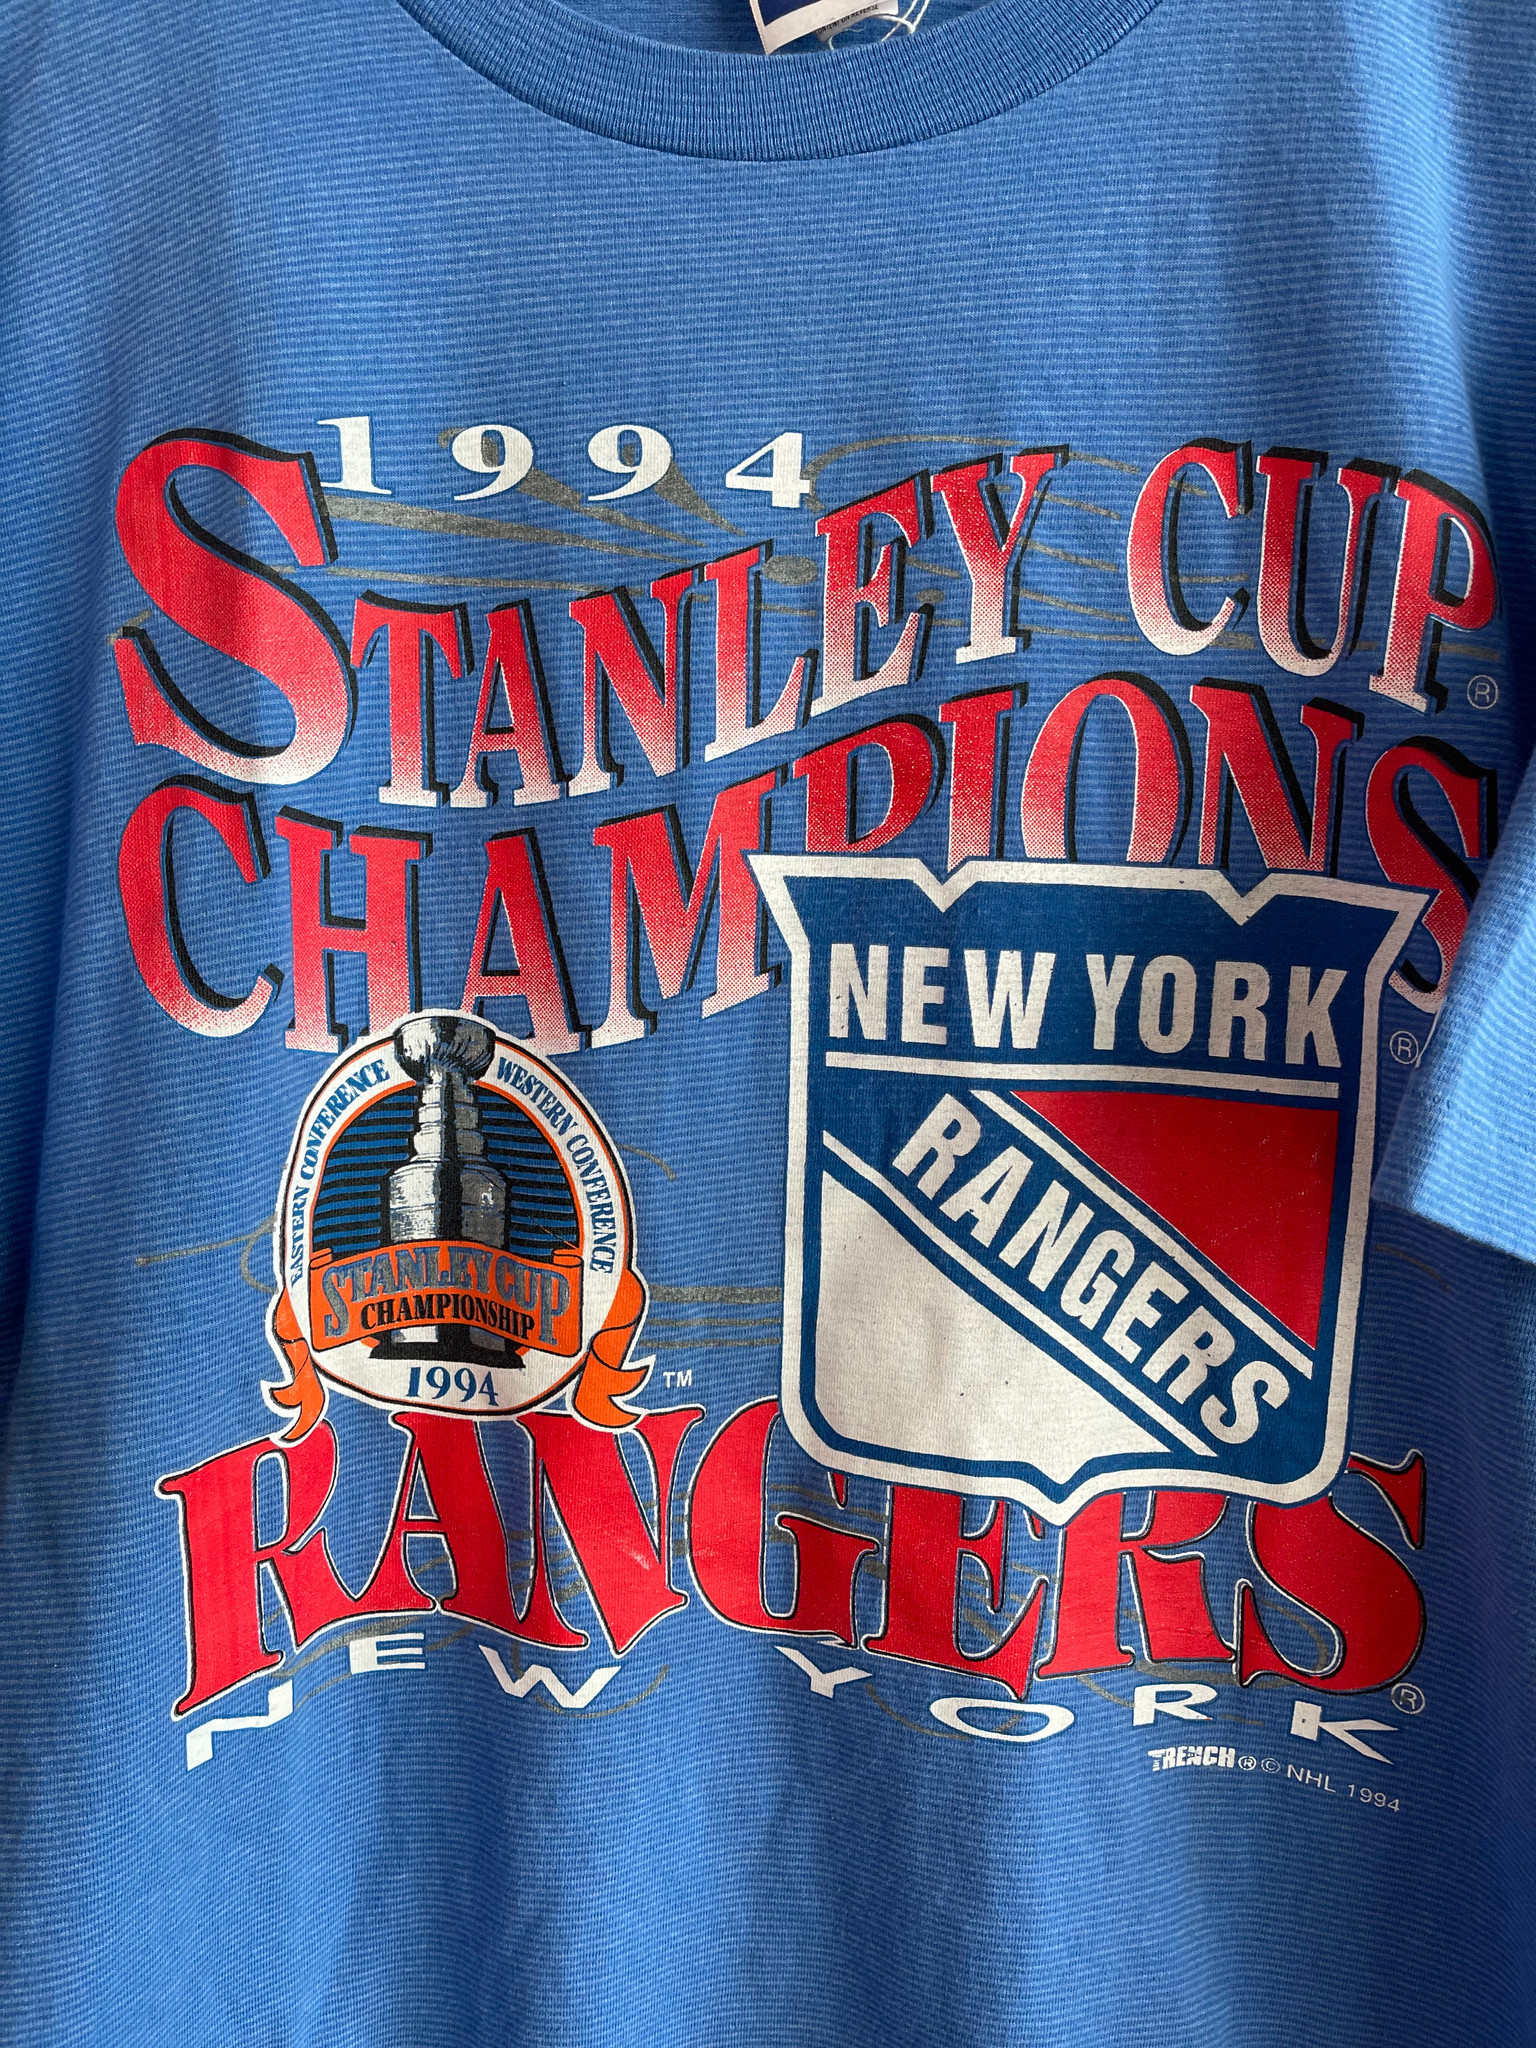 VINTAGE NY RANGERS 1994 STANLEY CUP CHAMPIONS TEE - Primetime